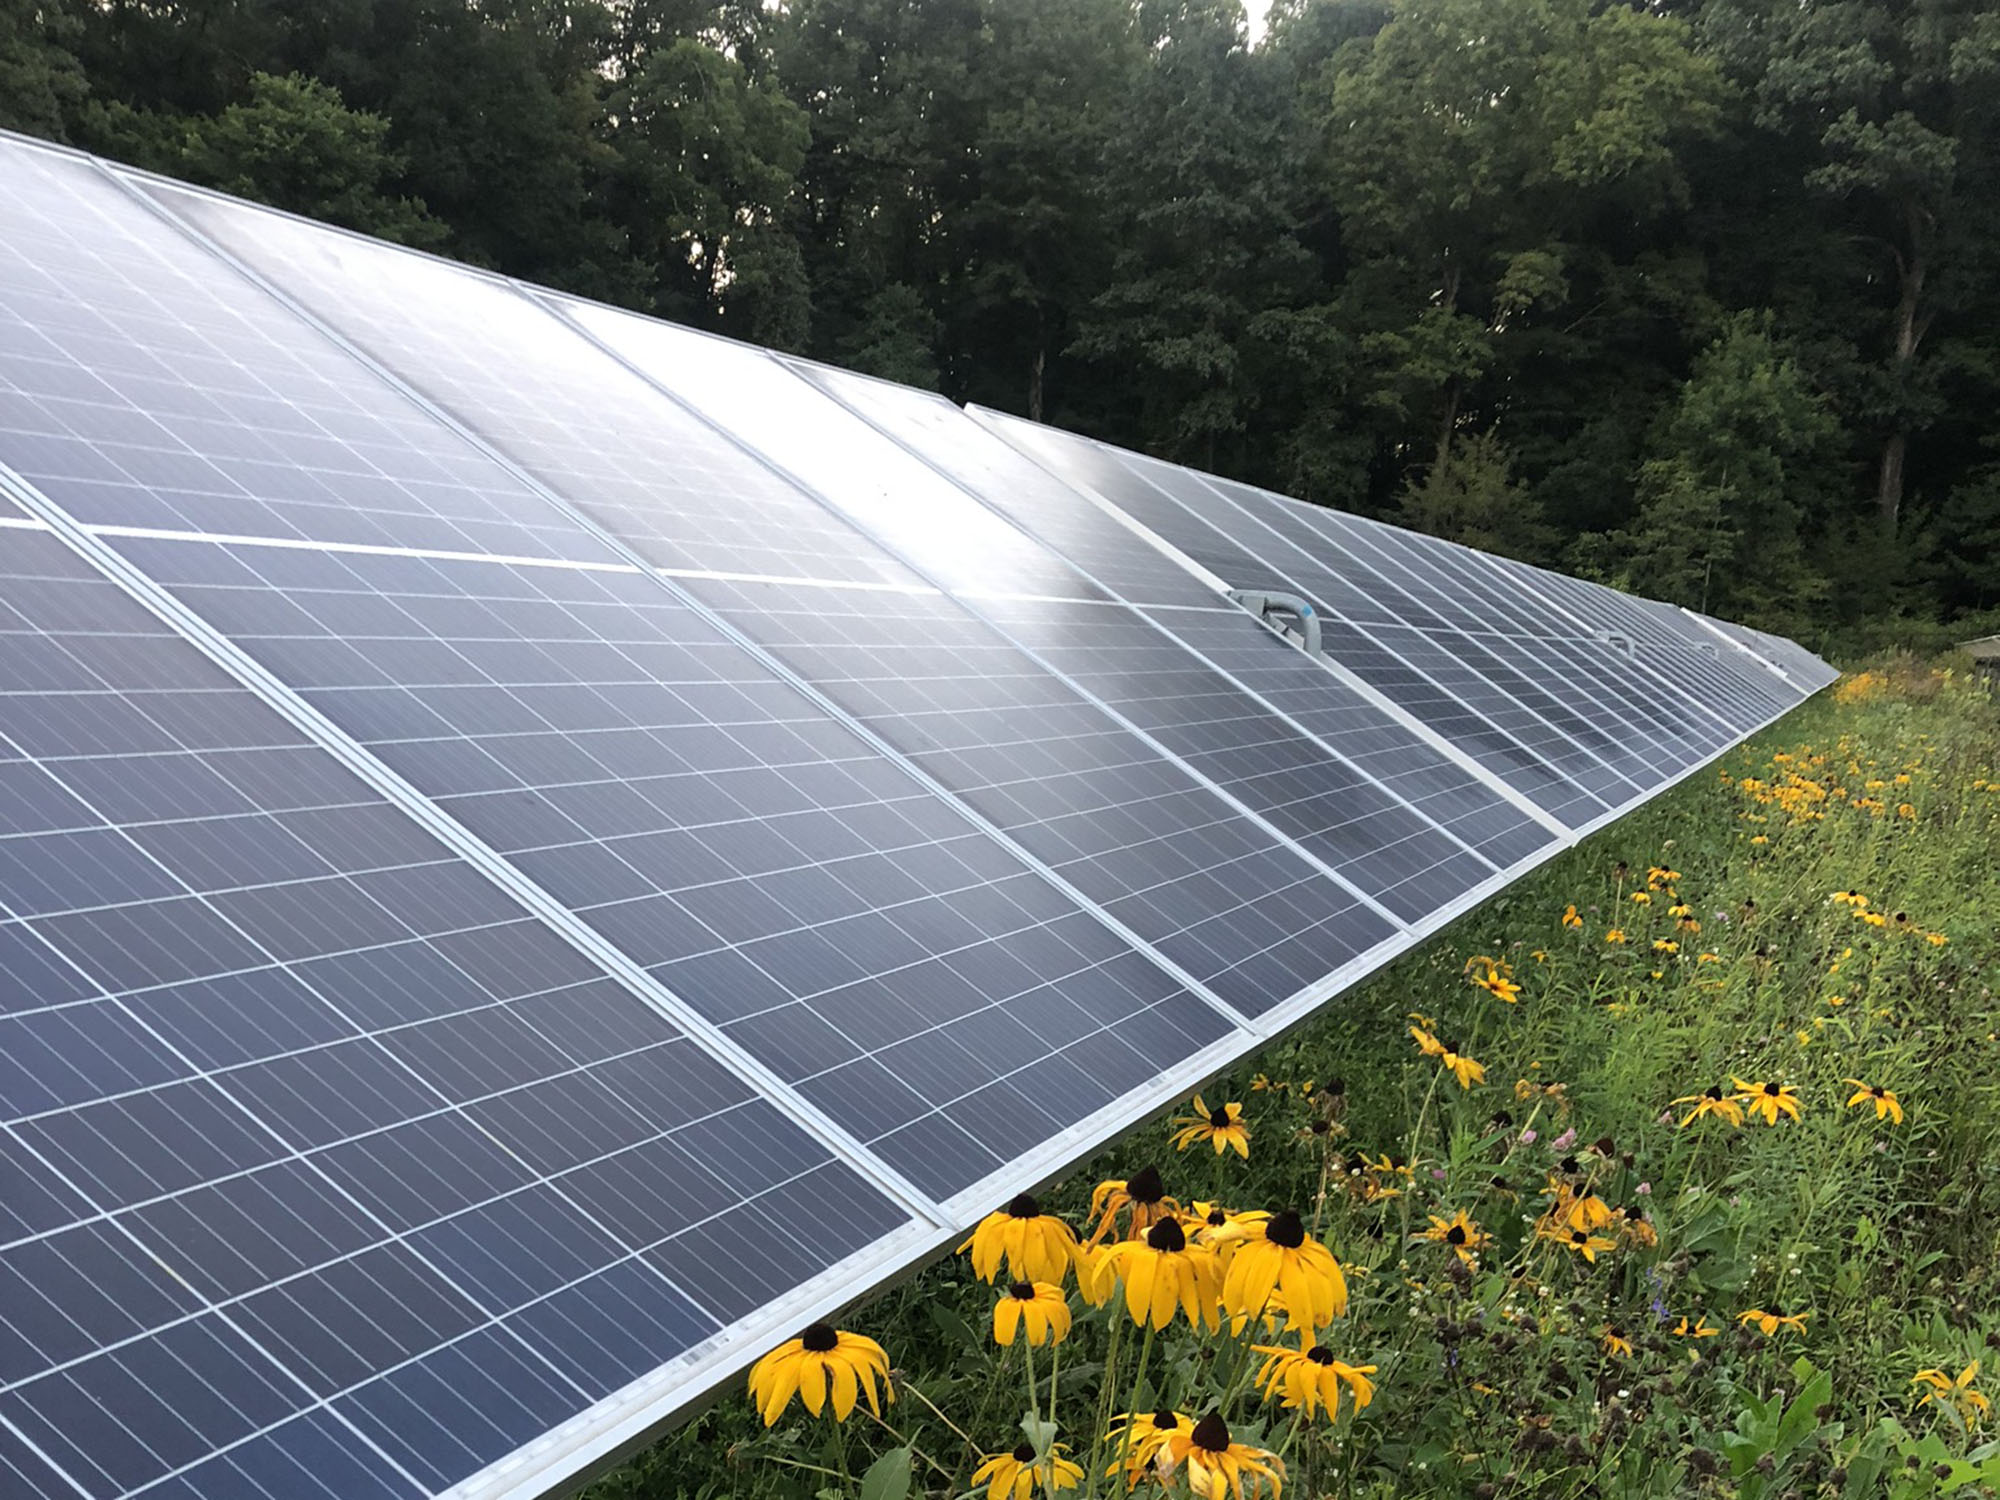 expanding-iowa-s-solar-tax-credit-seen-as-economic-boost-during-crisis